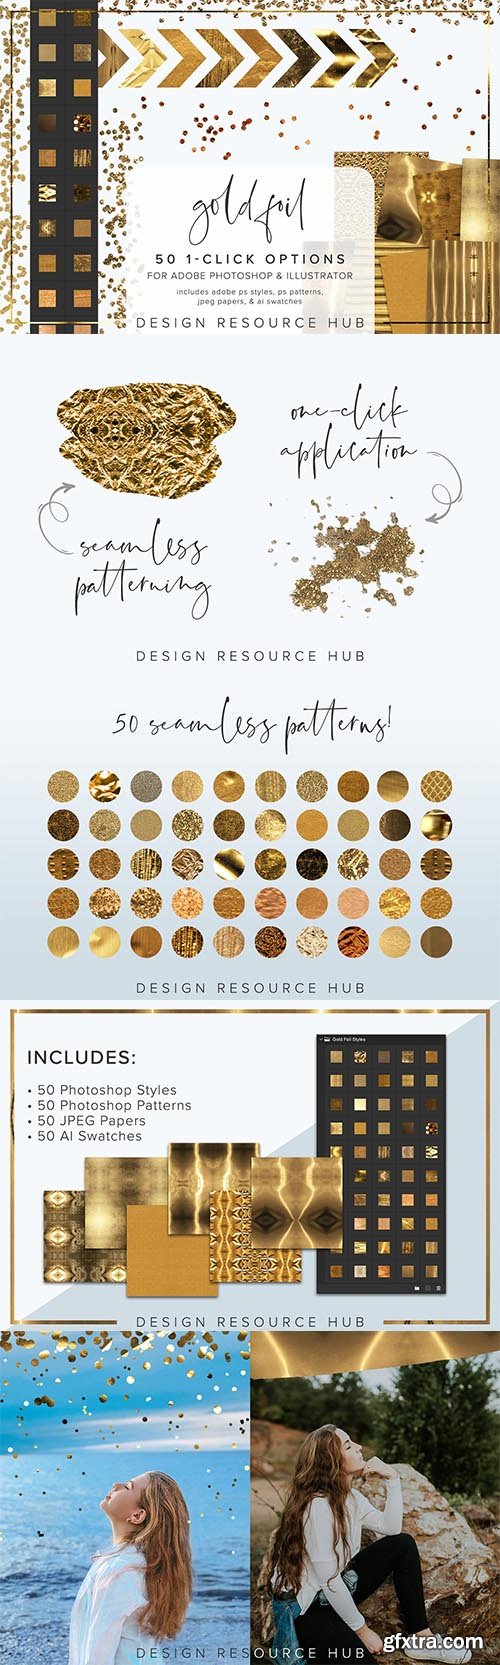 CreativeMarket - Gold Foil Photoshop Style Pack 6966029